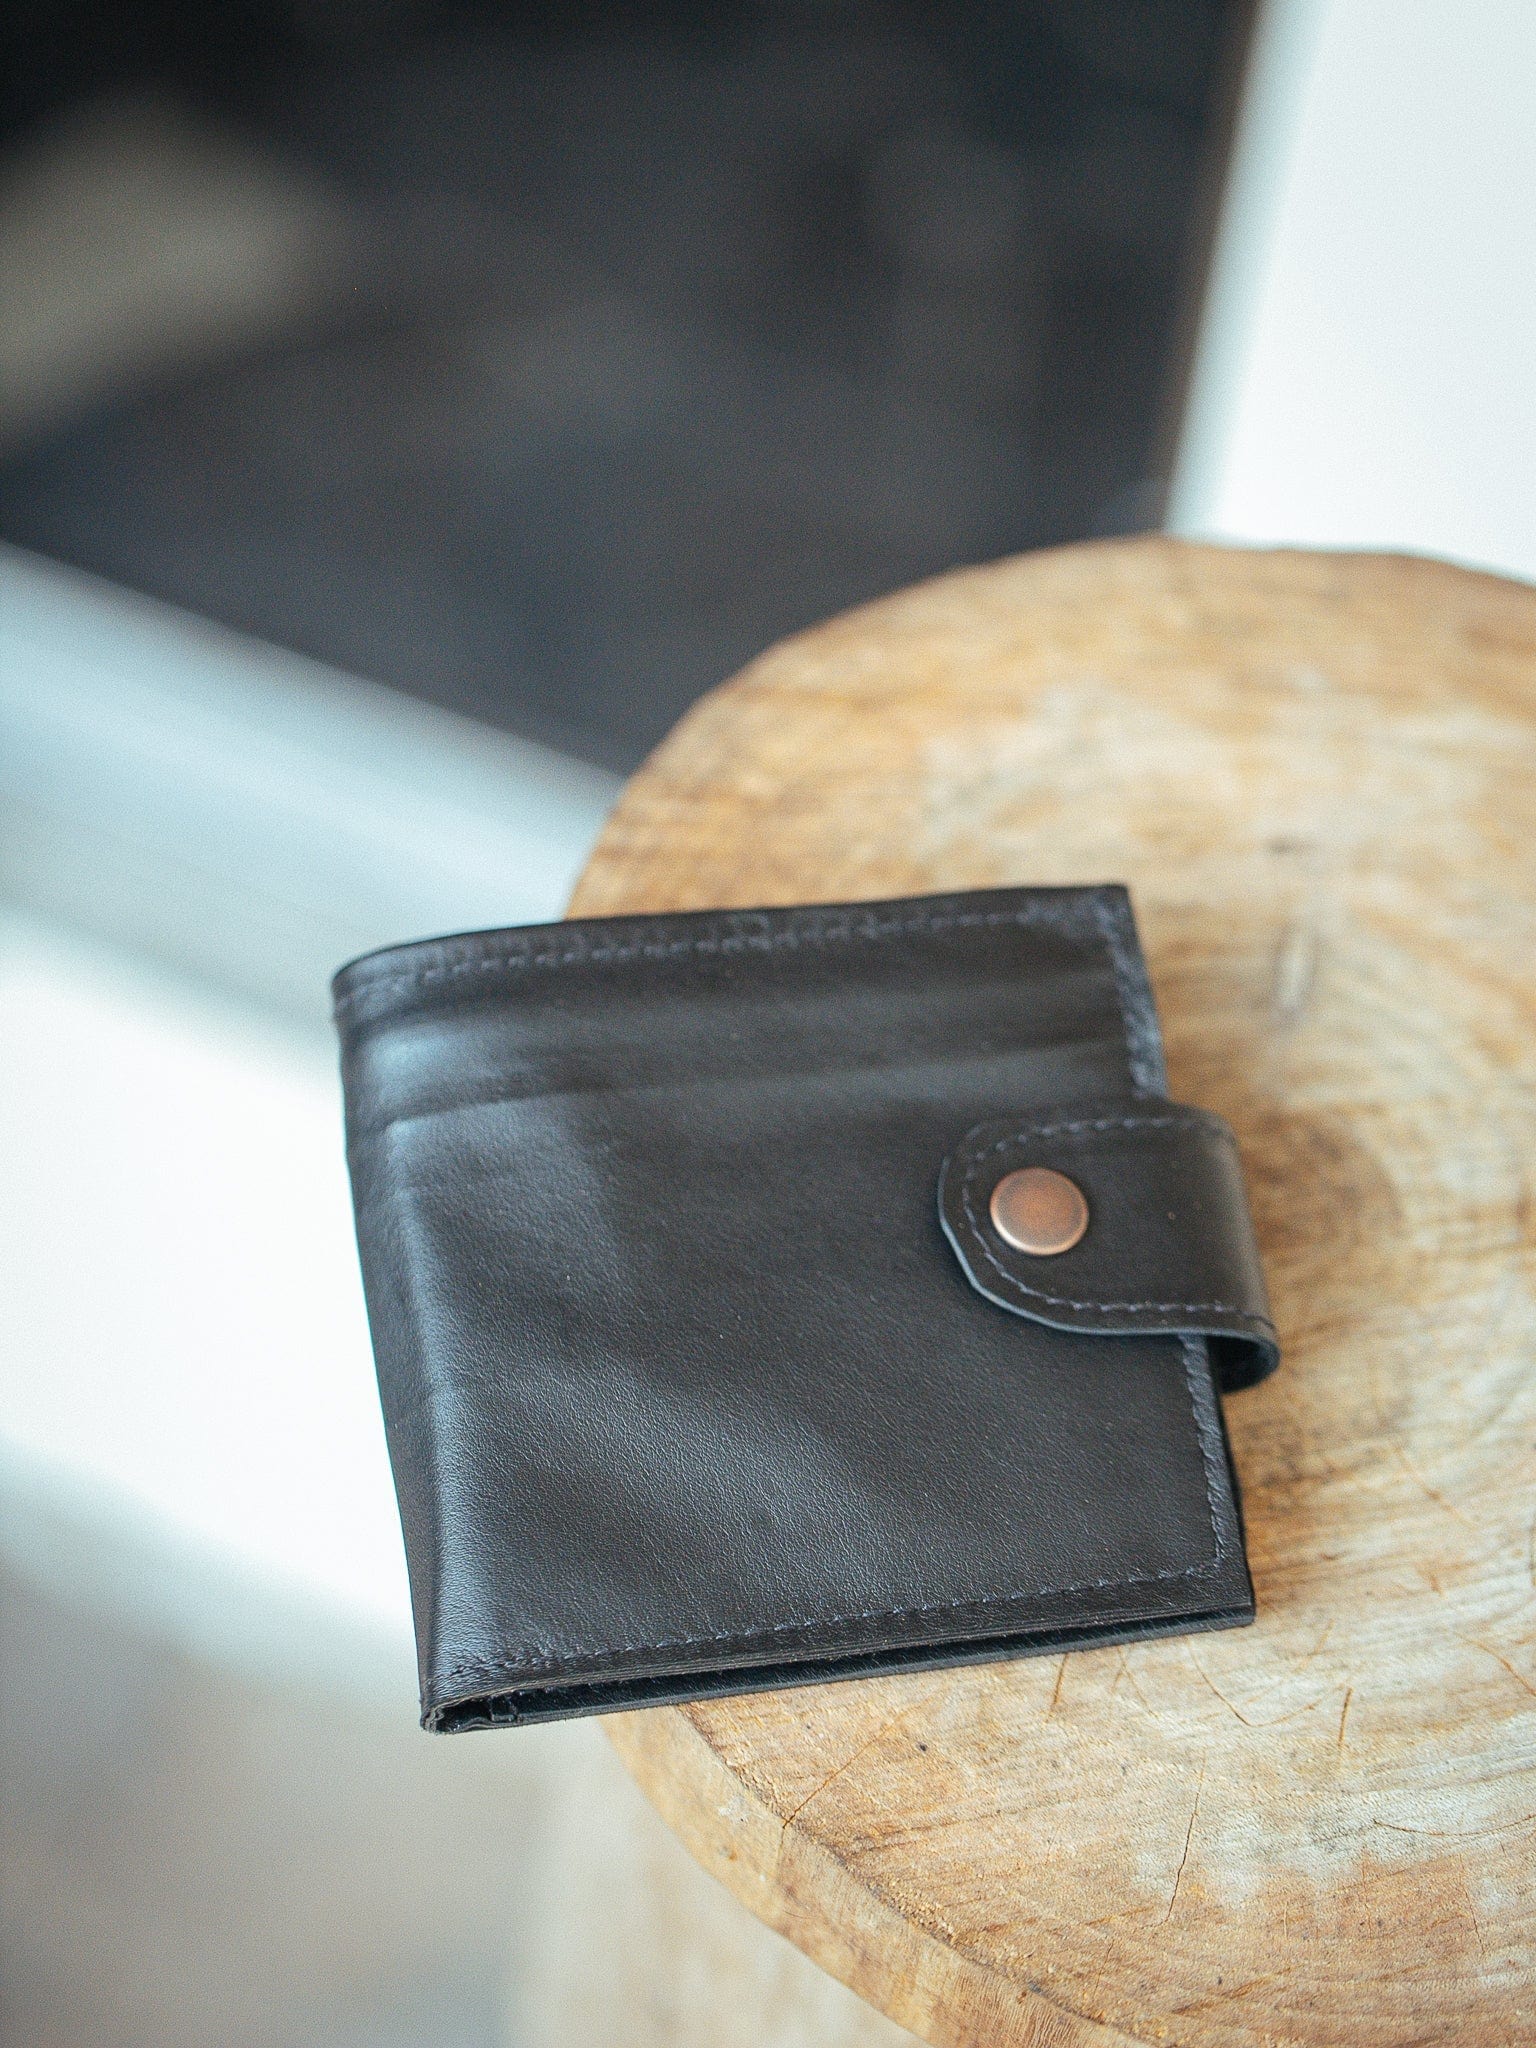 The Real McCaul Leathergoods Wallets Black Bifold Wallet With Coin Zip and Clip - Kangaroo Australian Made Australian Owned Australian Made Leather Bifold Wallet With Coin Zip and Clip - Kangaroo